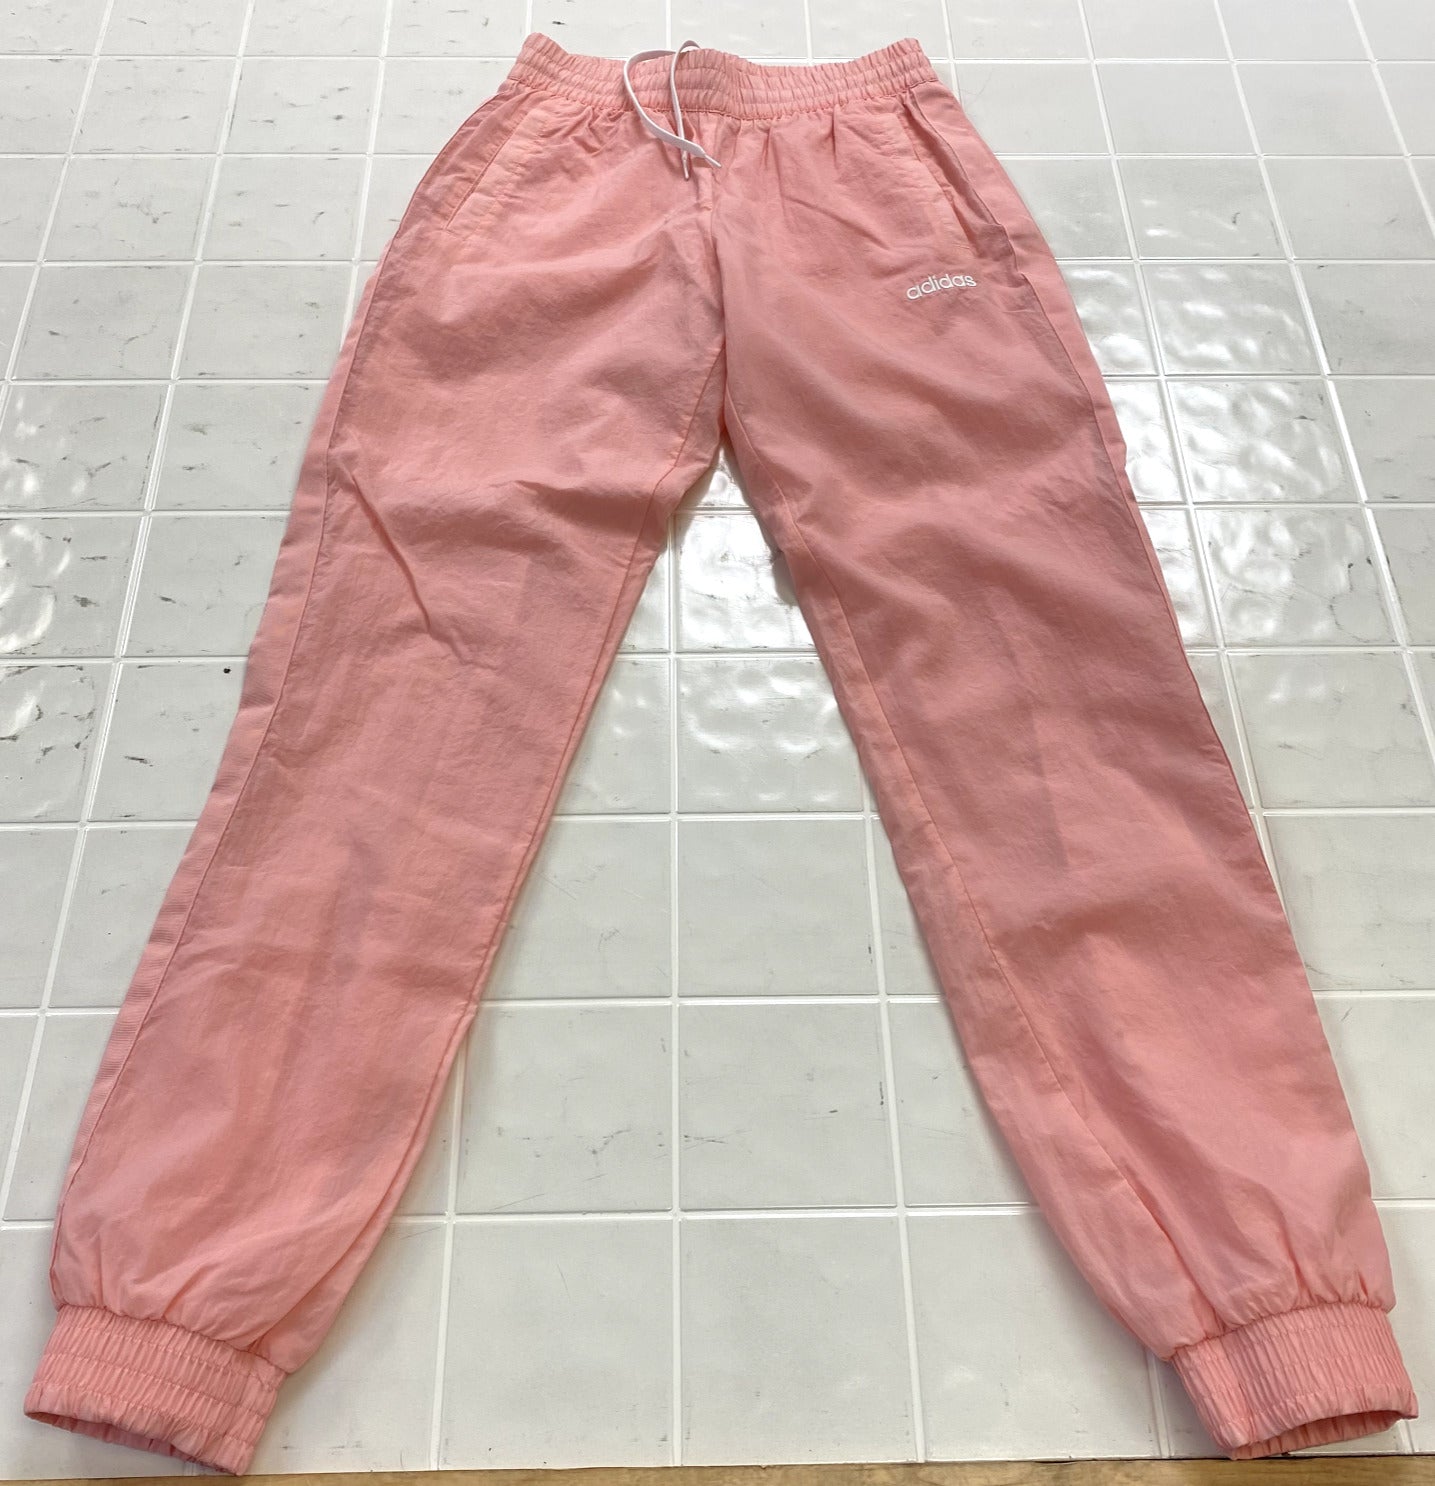 Adidas Light Pink Fully Lined Joggers Pockets Athletic Barbiecore Women Size M